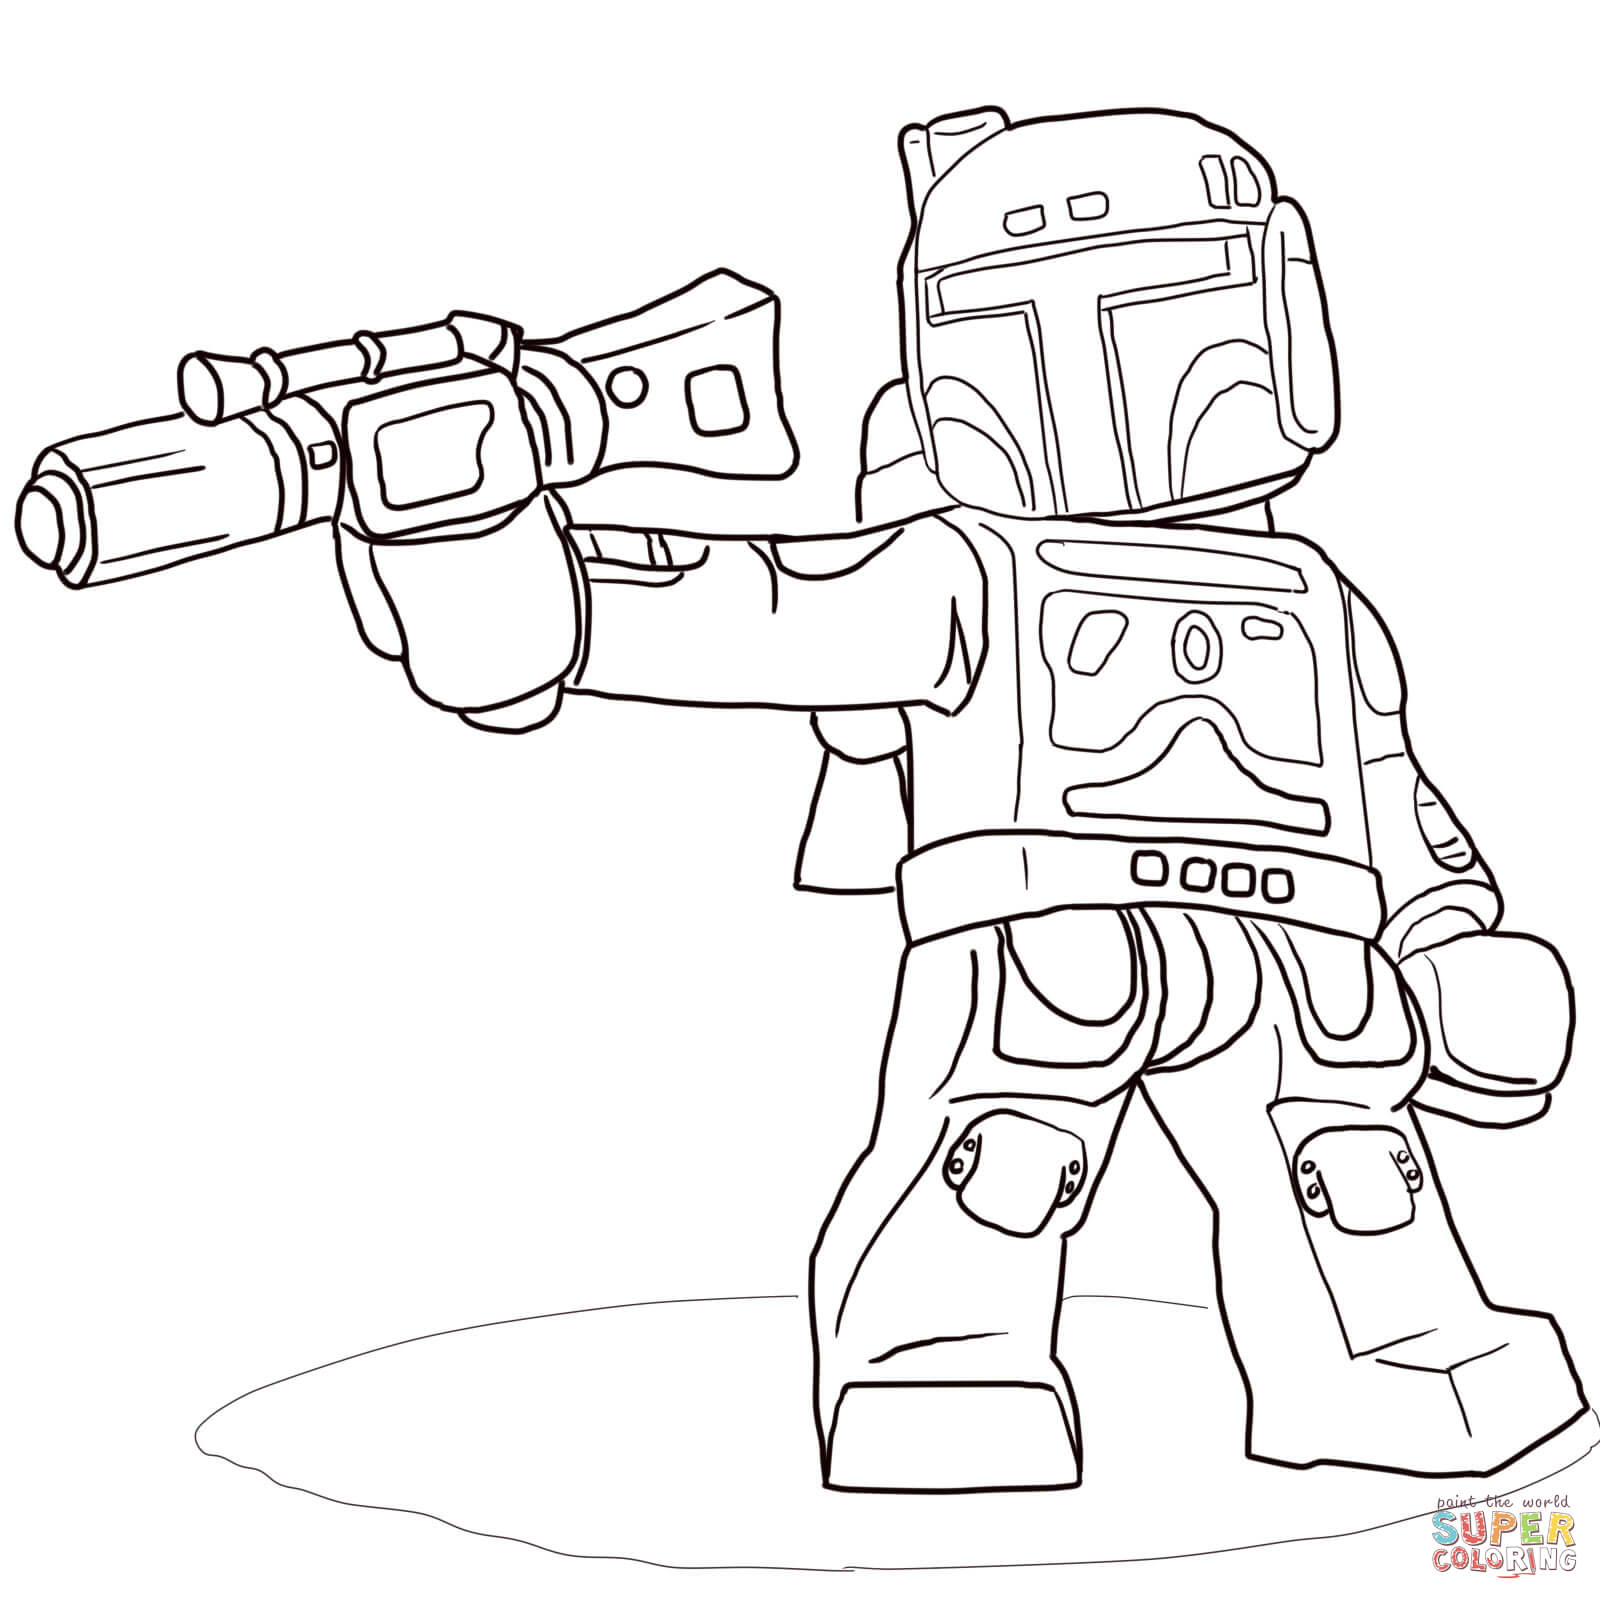 Lego Star Wars Boba Fett coloring page | Free Printable Coloring Pages